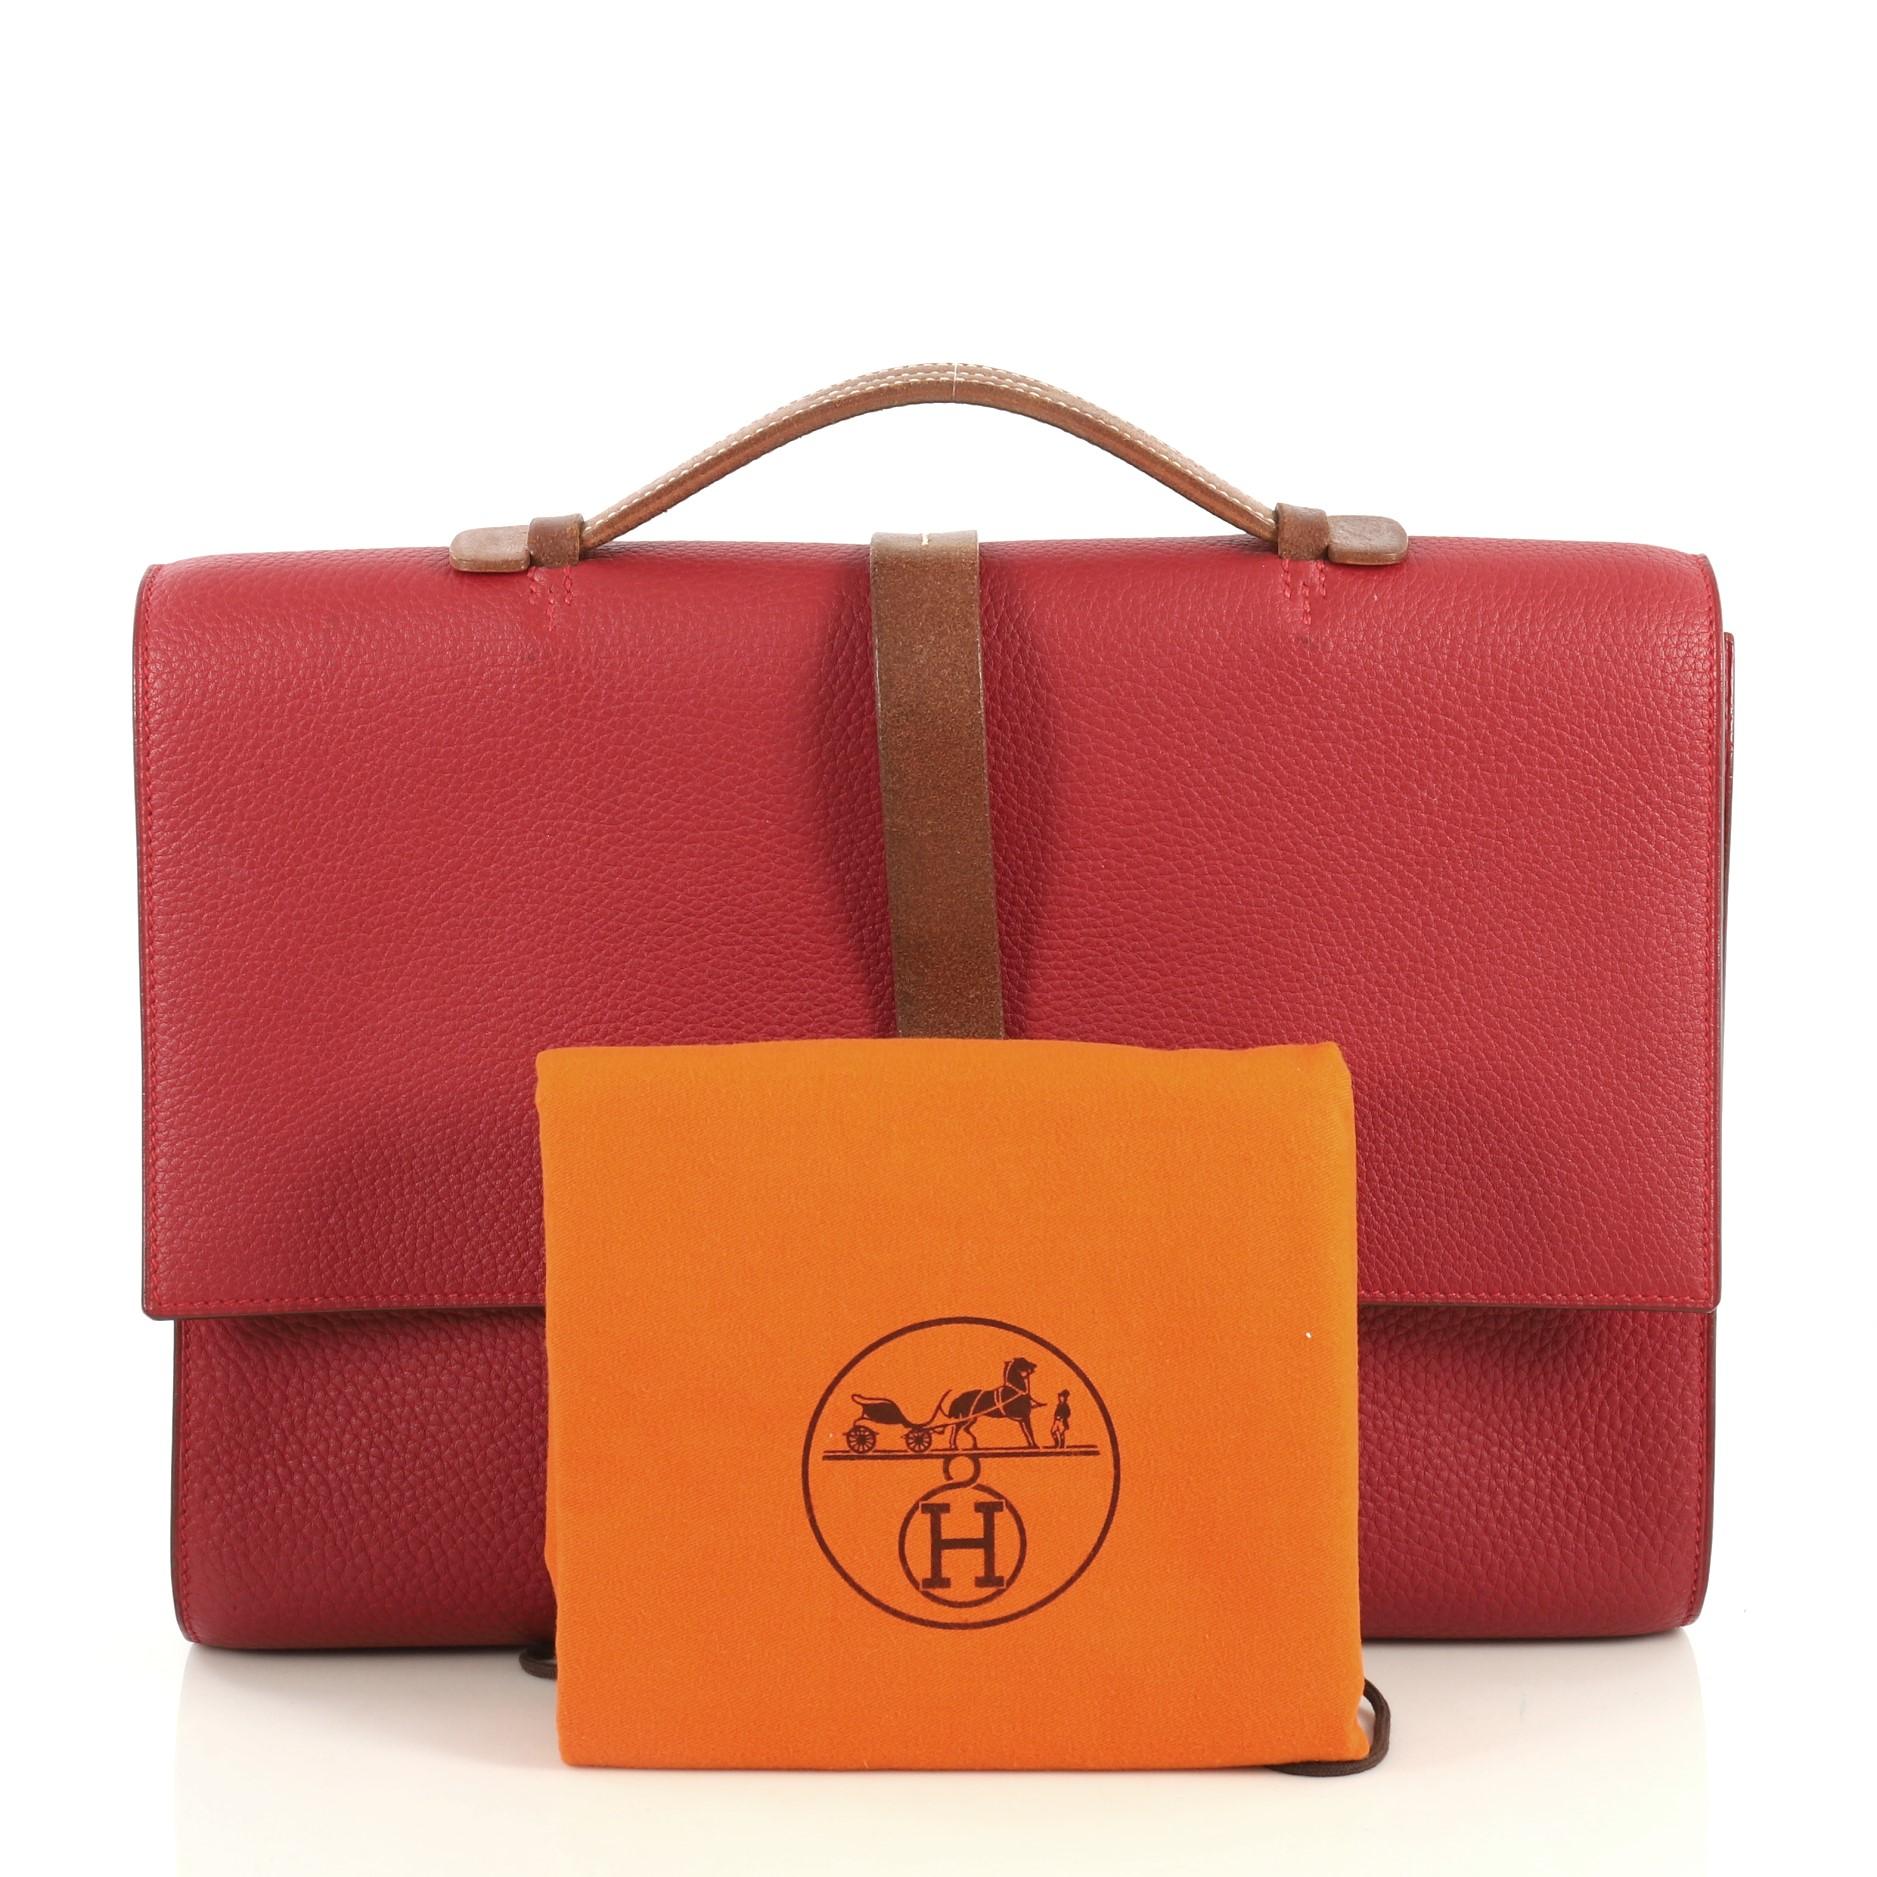 This Hermes Etriviere II Briefcase Fjord 38, crafted in Rouge Vif red Fjord and Fauve leather, features a leather top handle, wrap-around leather strap and palladium hardware. Its buckle closure opens to a Rouge Vif red leather interior. Date stamp